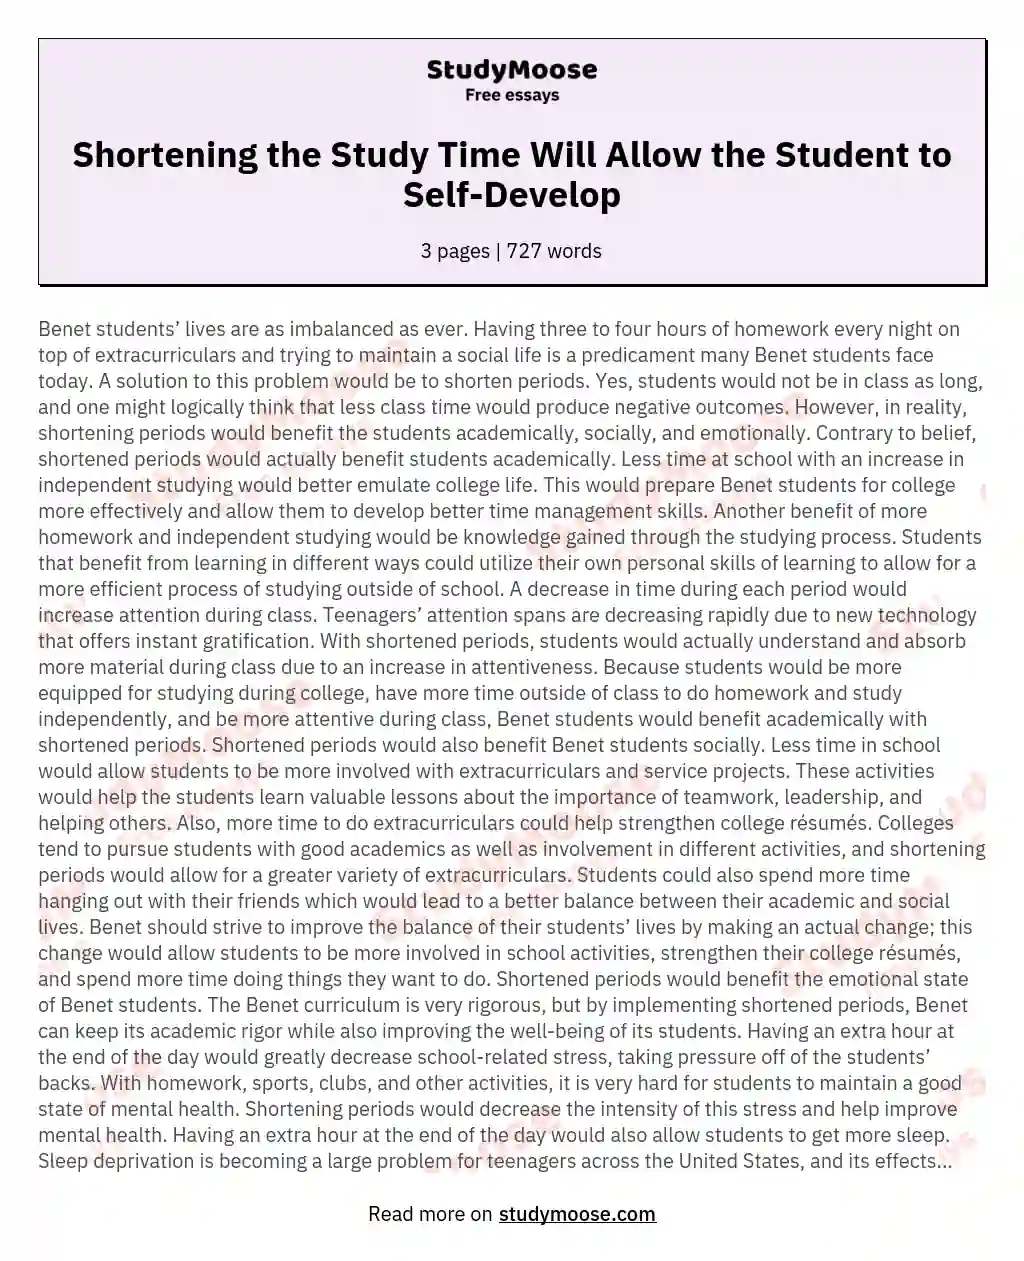 Shortening the Study Time Will Allow the Student to Self-Develop essay